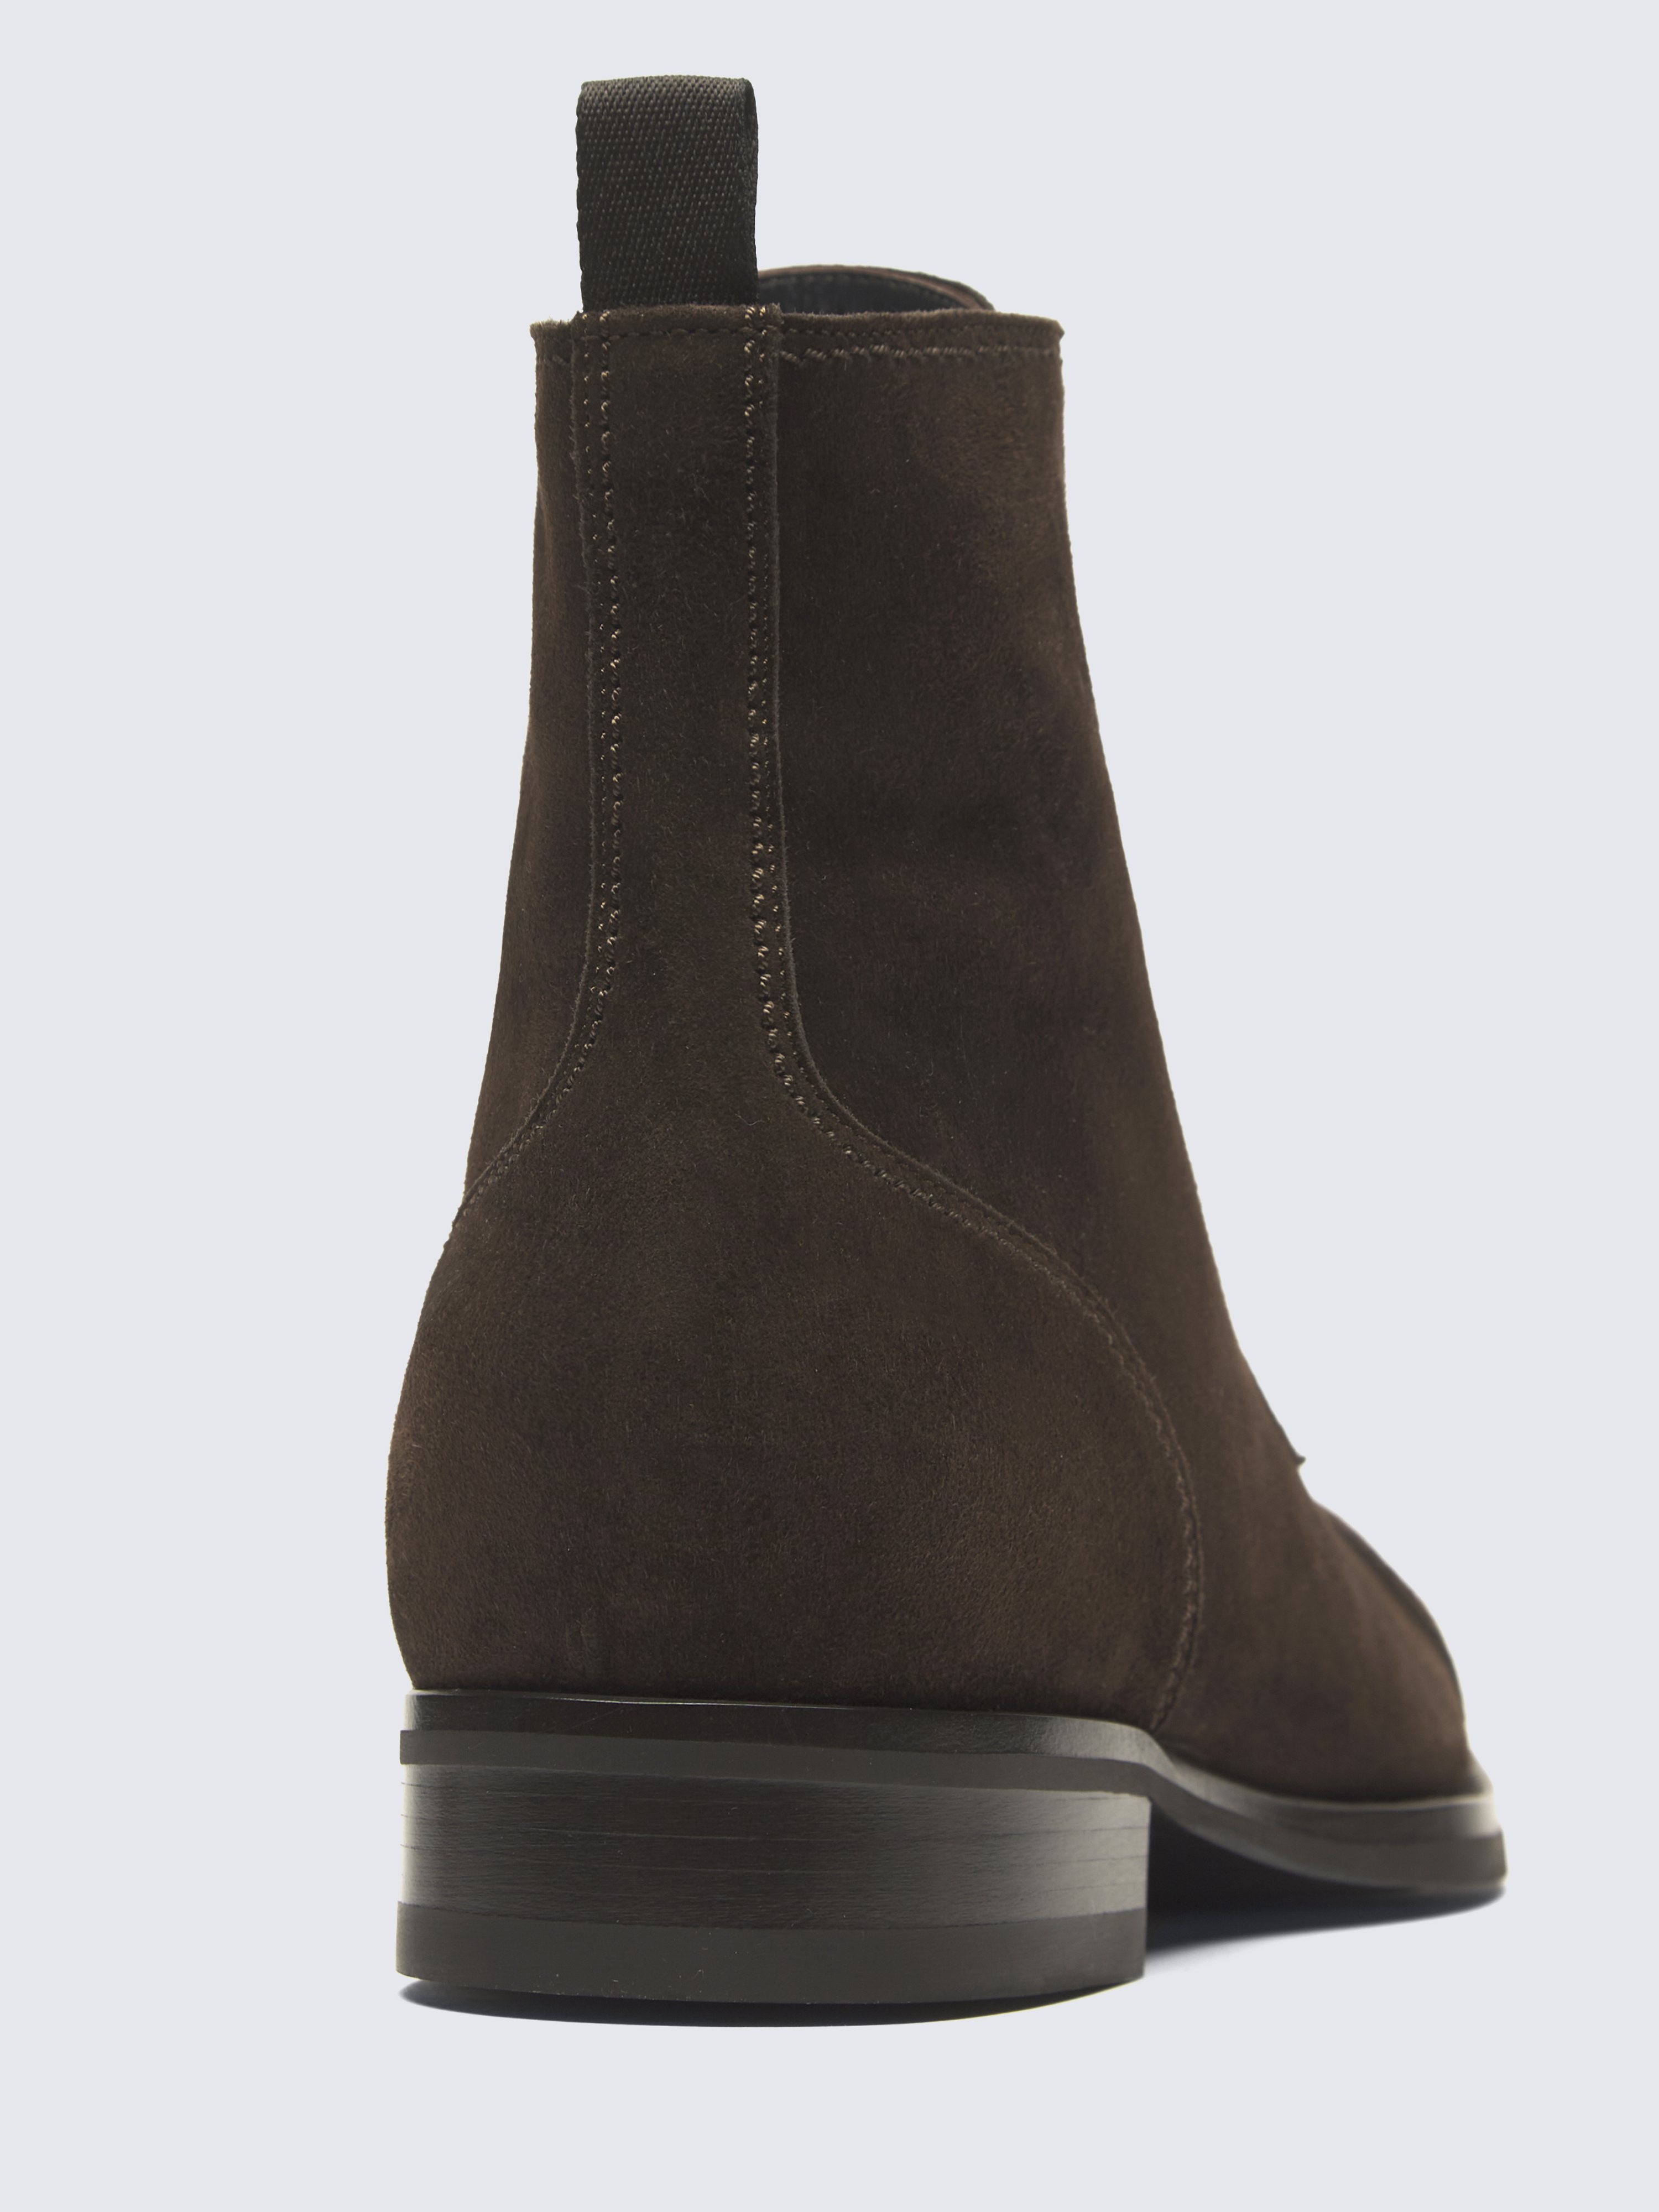 Brioni faux fur-lined suede boots - Brown